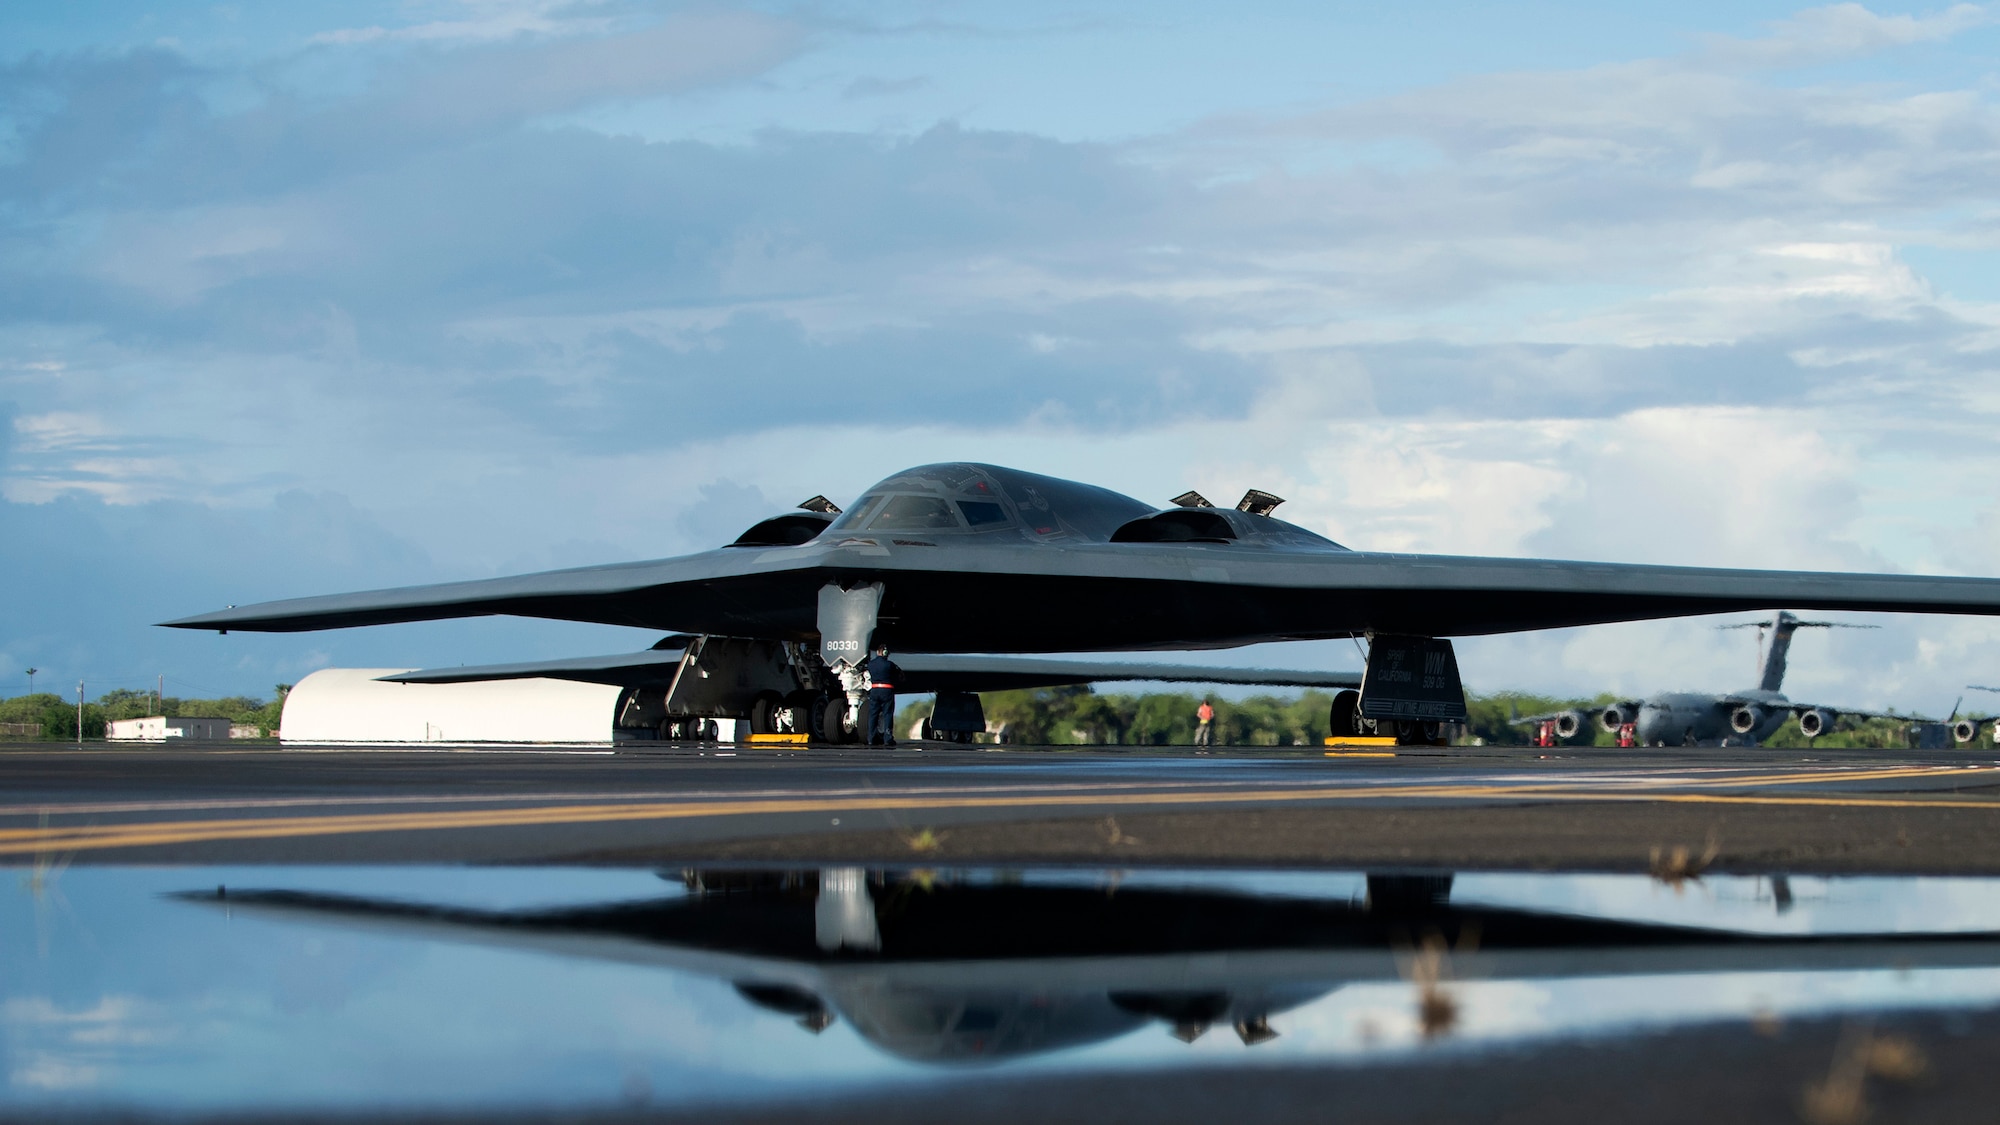 A U.S. Air Force B-2 Spirit deployed from Whiteman Air Force Base, Missouri, to Joint Base Pearl Harbor-Hickam, Hawaii, in support of the U.S. Strategic Command’s Bomber Task Force deployment is parked on the flightline Sept. 26, 2018. The B-2 is a multi-role bomber with a wingspan of 172 feet capable of delivering both conventional and nuclear munitions. (U.S. Air Force photo by Staff Sgt. Danielle Quilla)